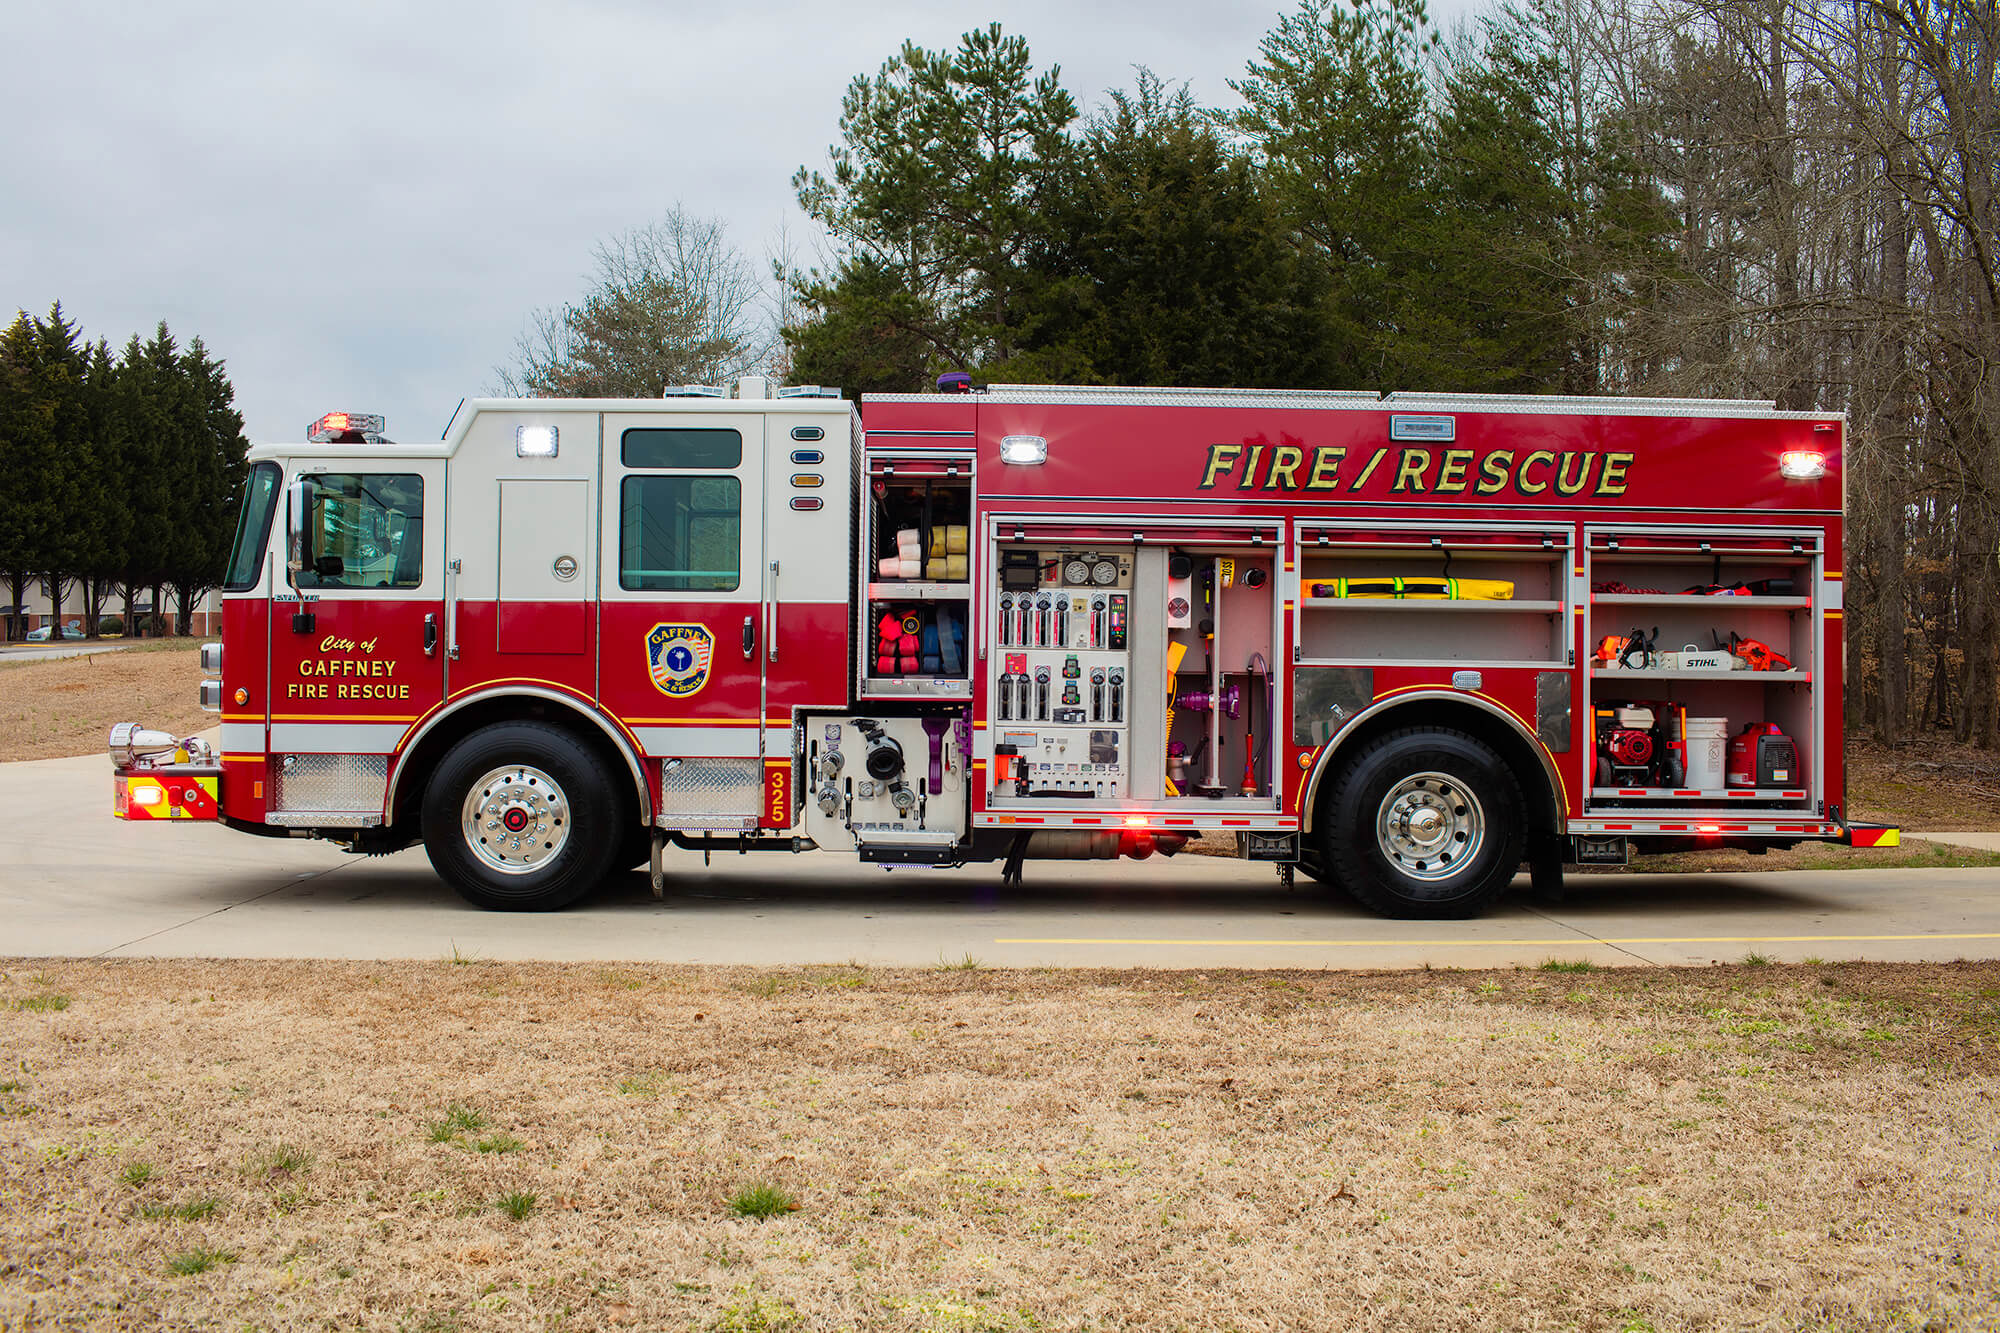 Driver Side of Fire Truck Comprtmentation and Equipment